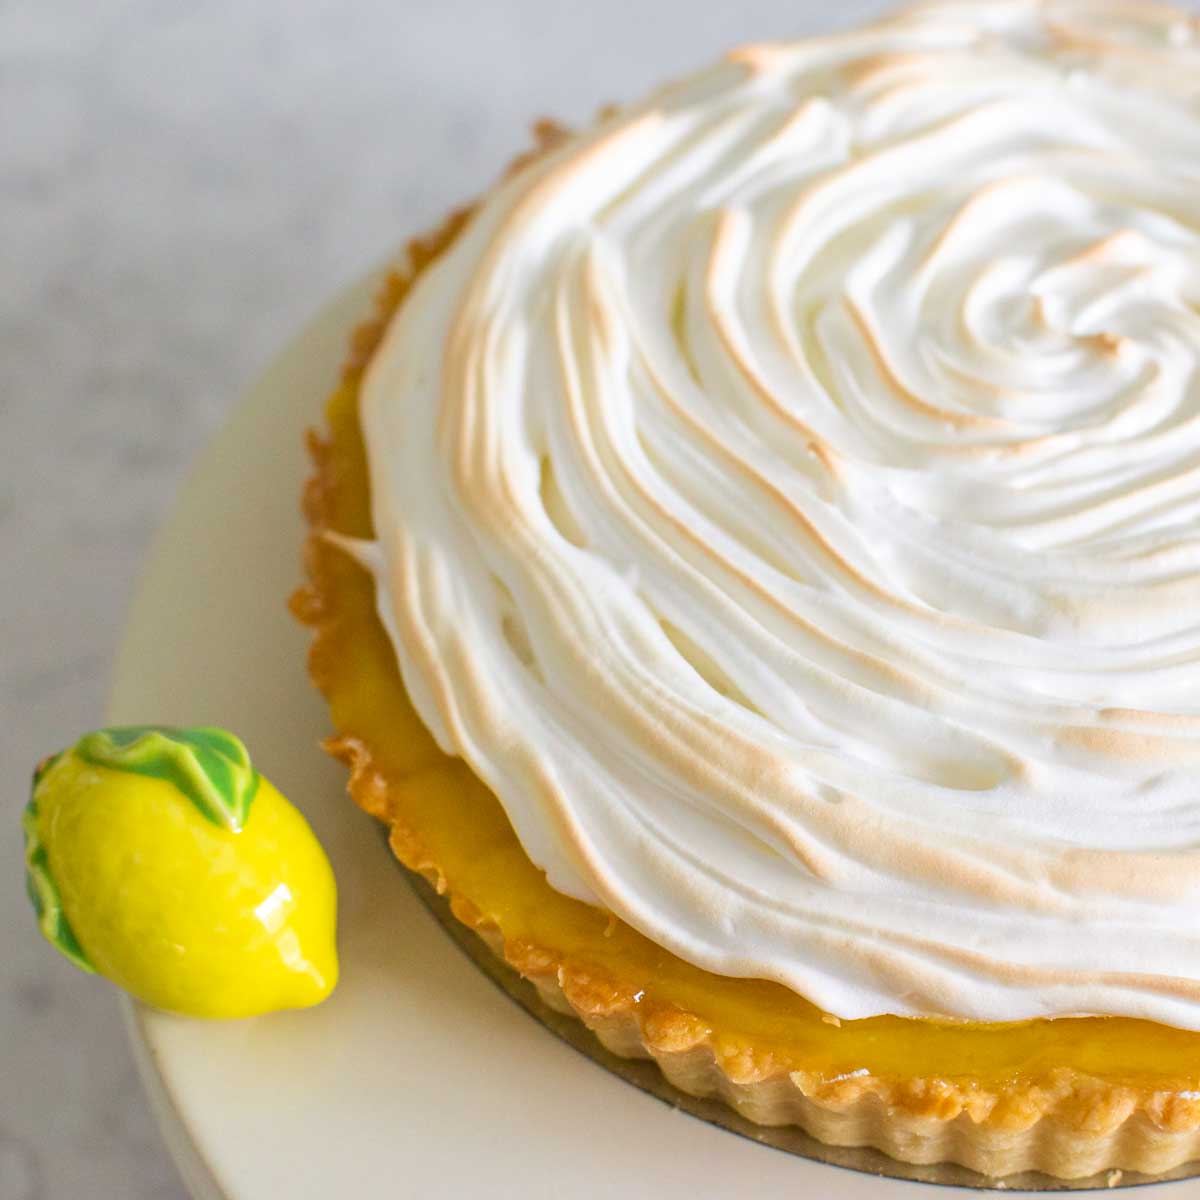 The finished lemon meringue tart is on a cake plate with a ceramic lemon decoration next to it.